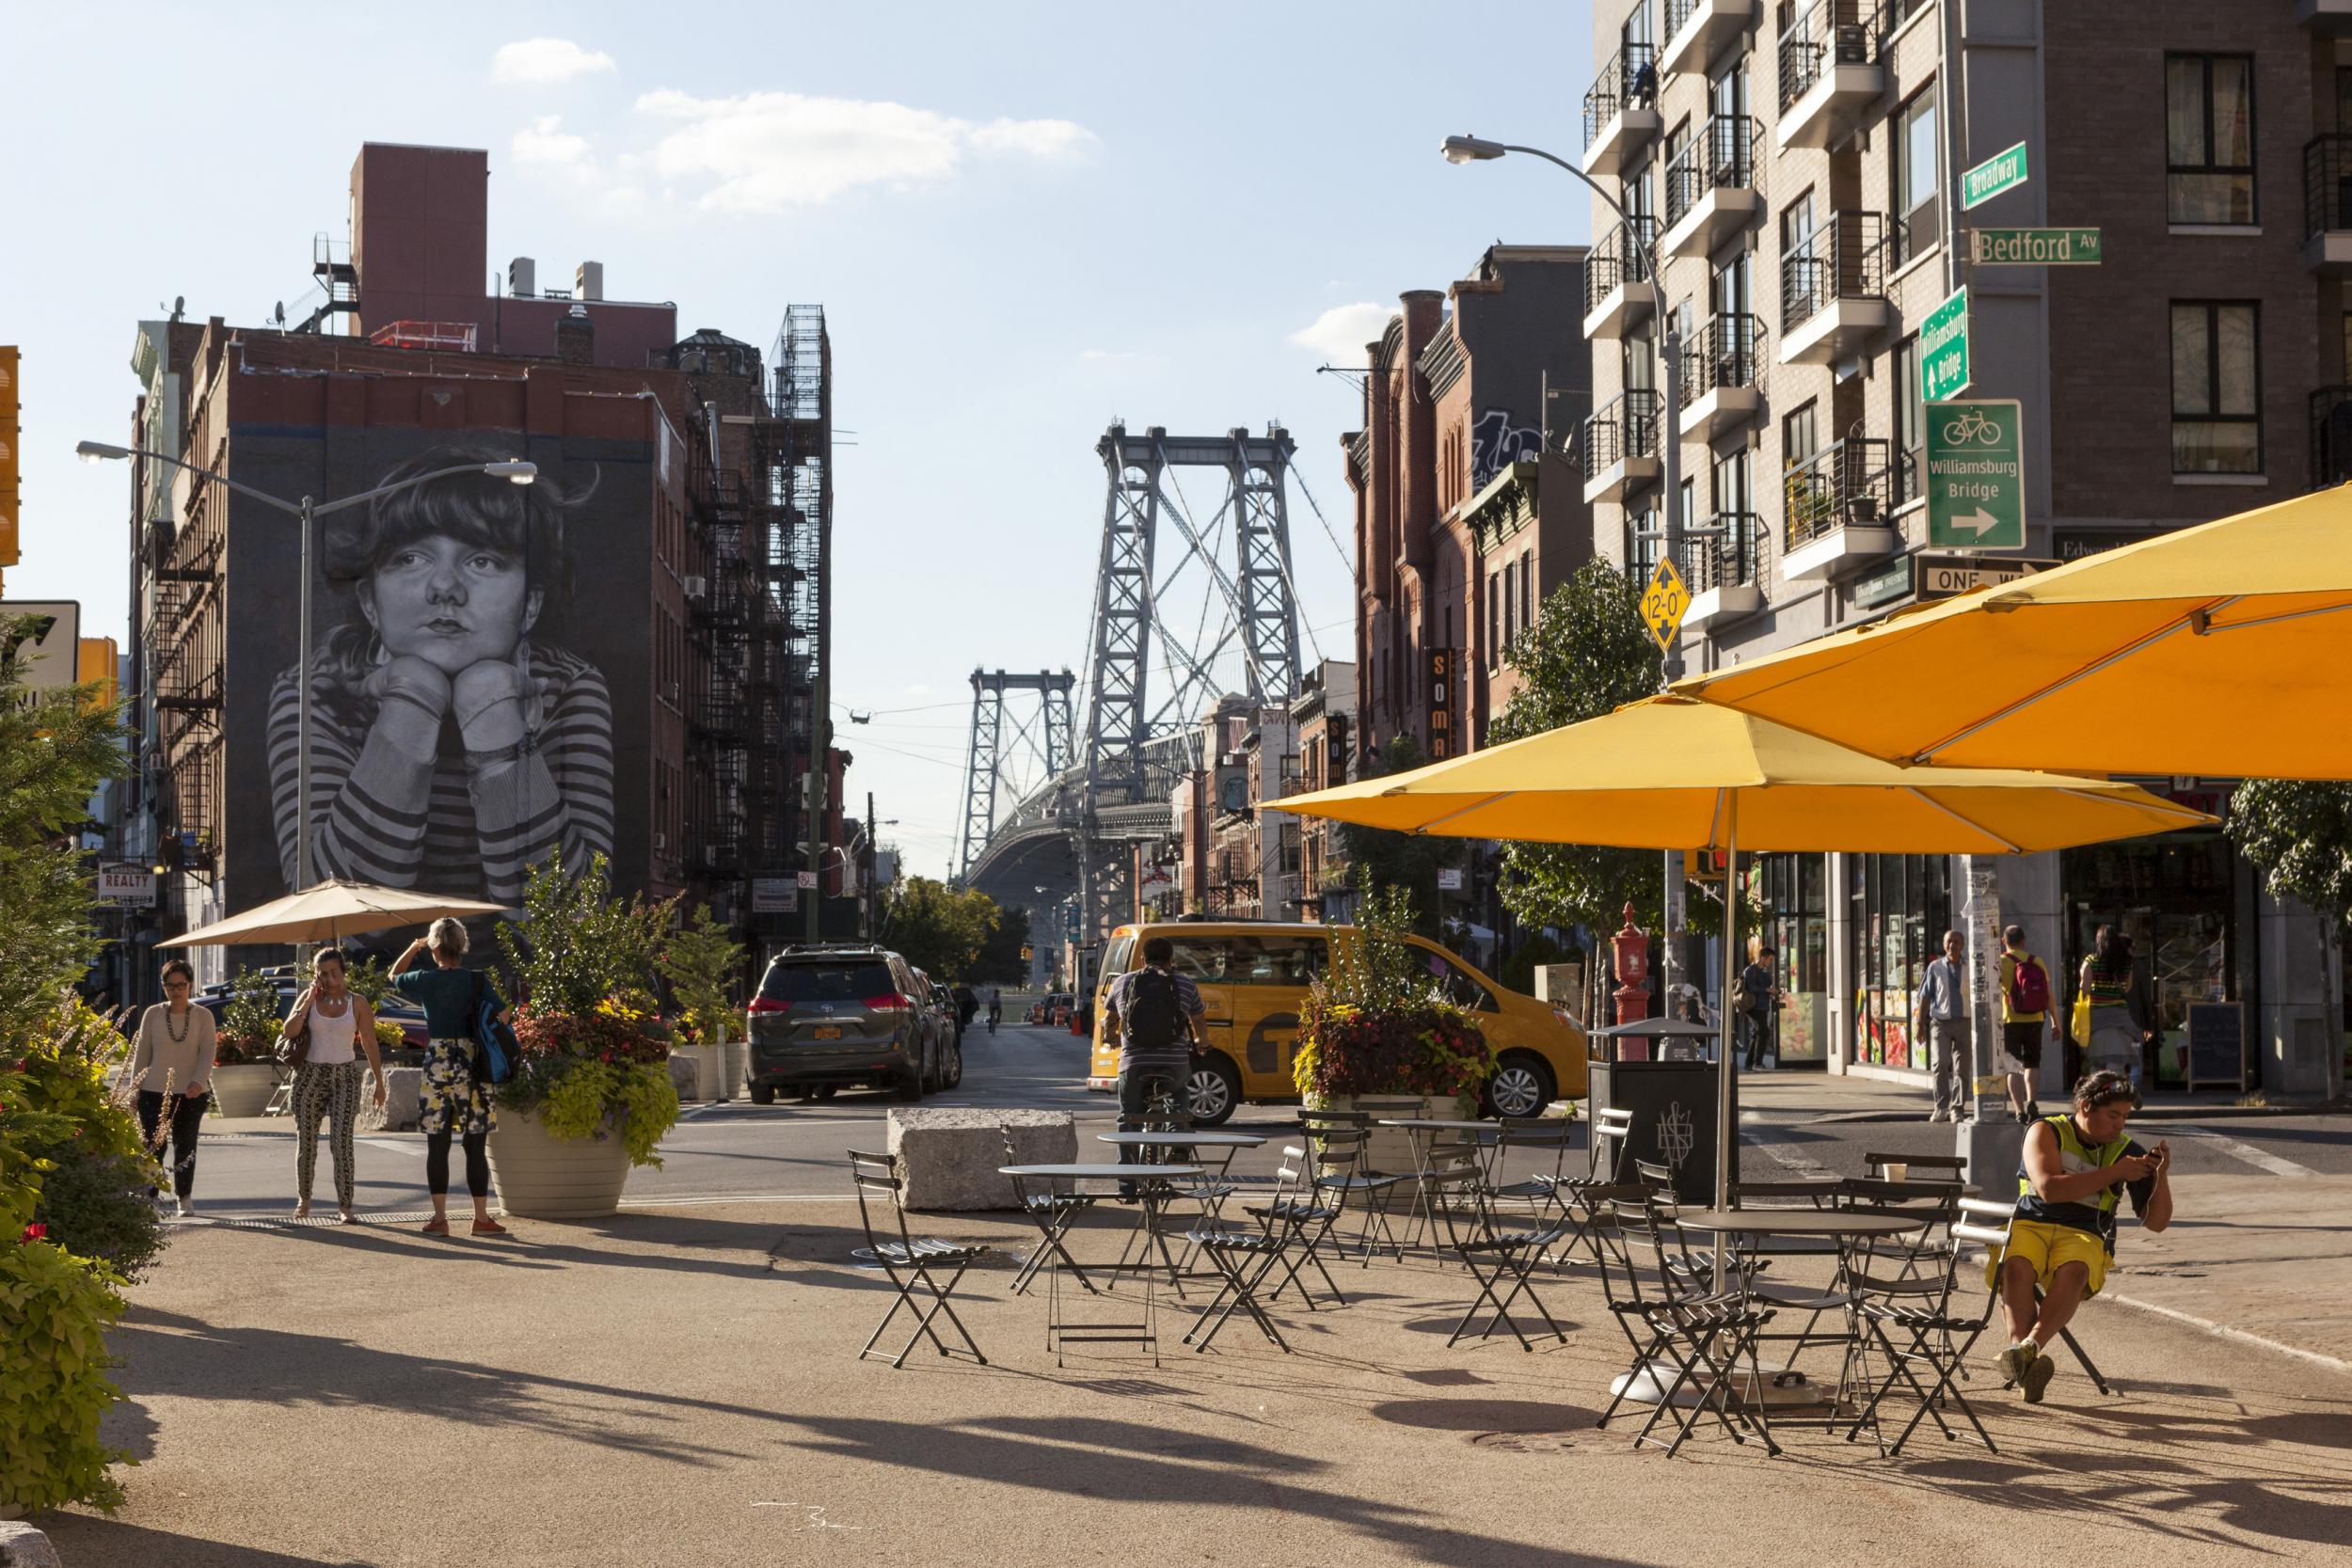 Wide pavements and street art: welcome to Williamsburg